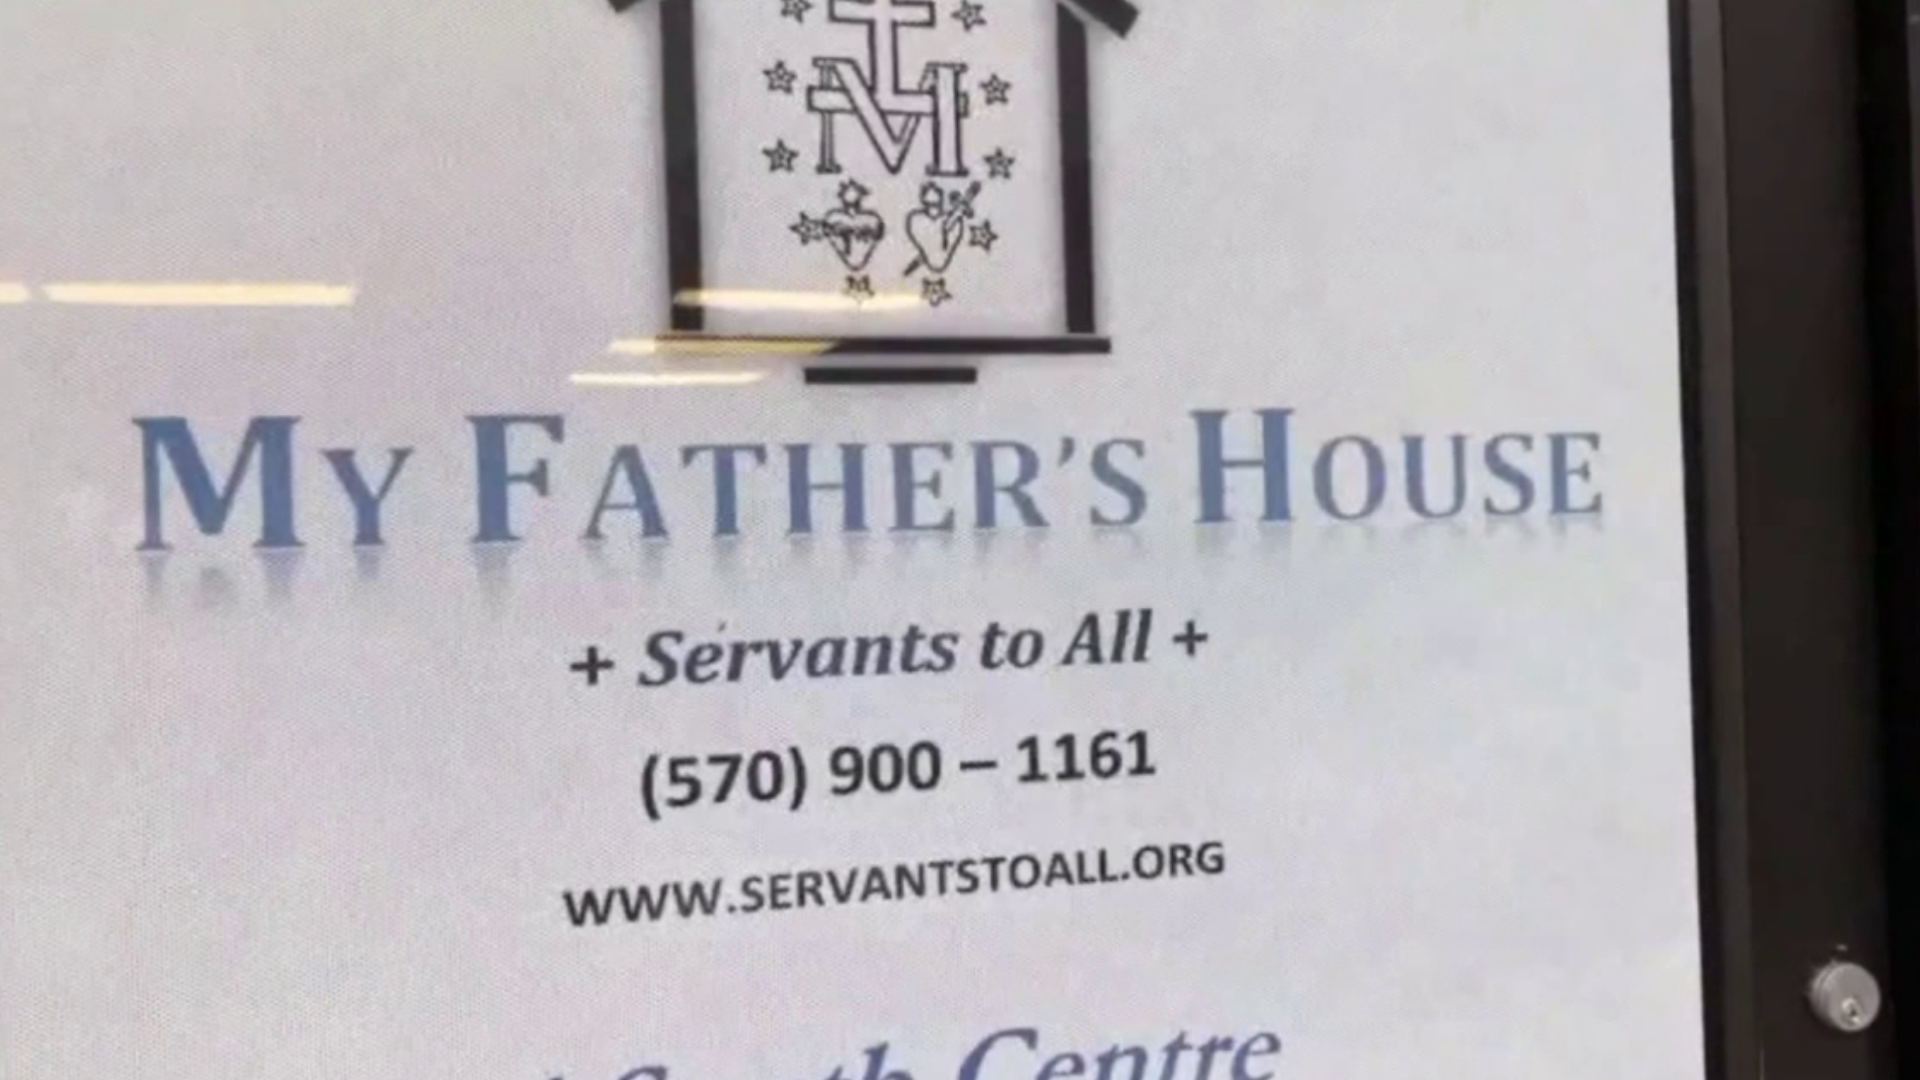 Servants to All, an organization in Pottsville, recently received a grant to help more individuals in the community.